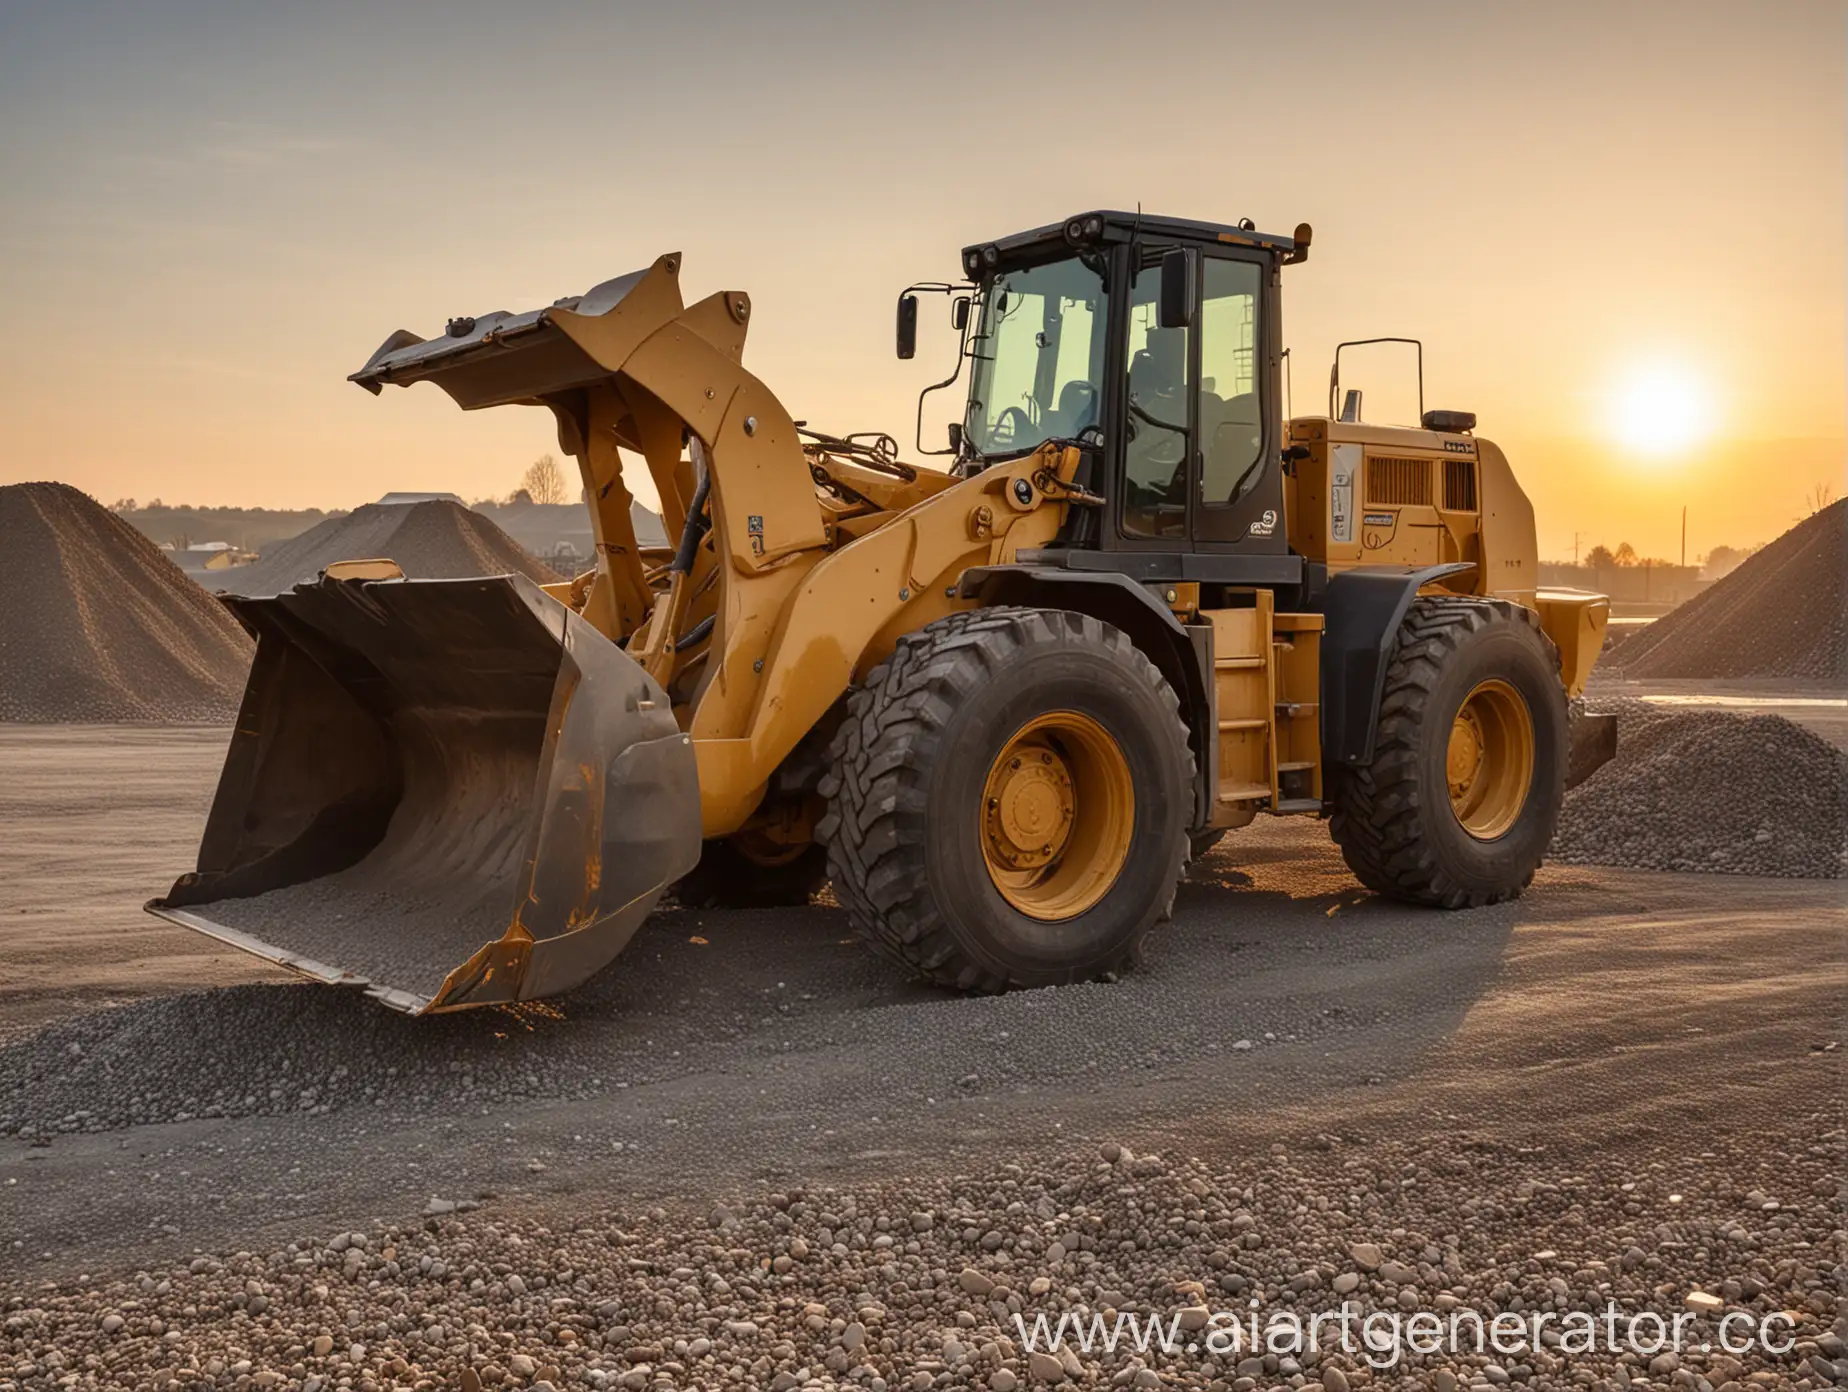 FrontEnd-Loader-at-Sunset-with-Lowered-Bucket-Near-Gravel-Pile